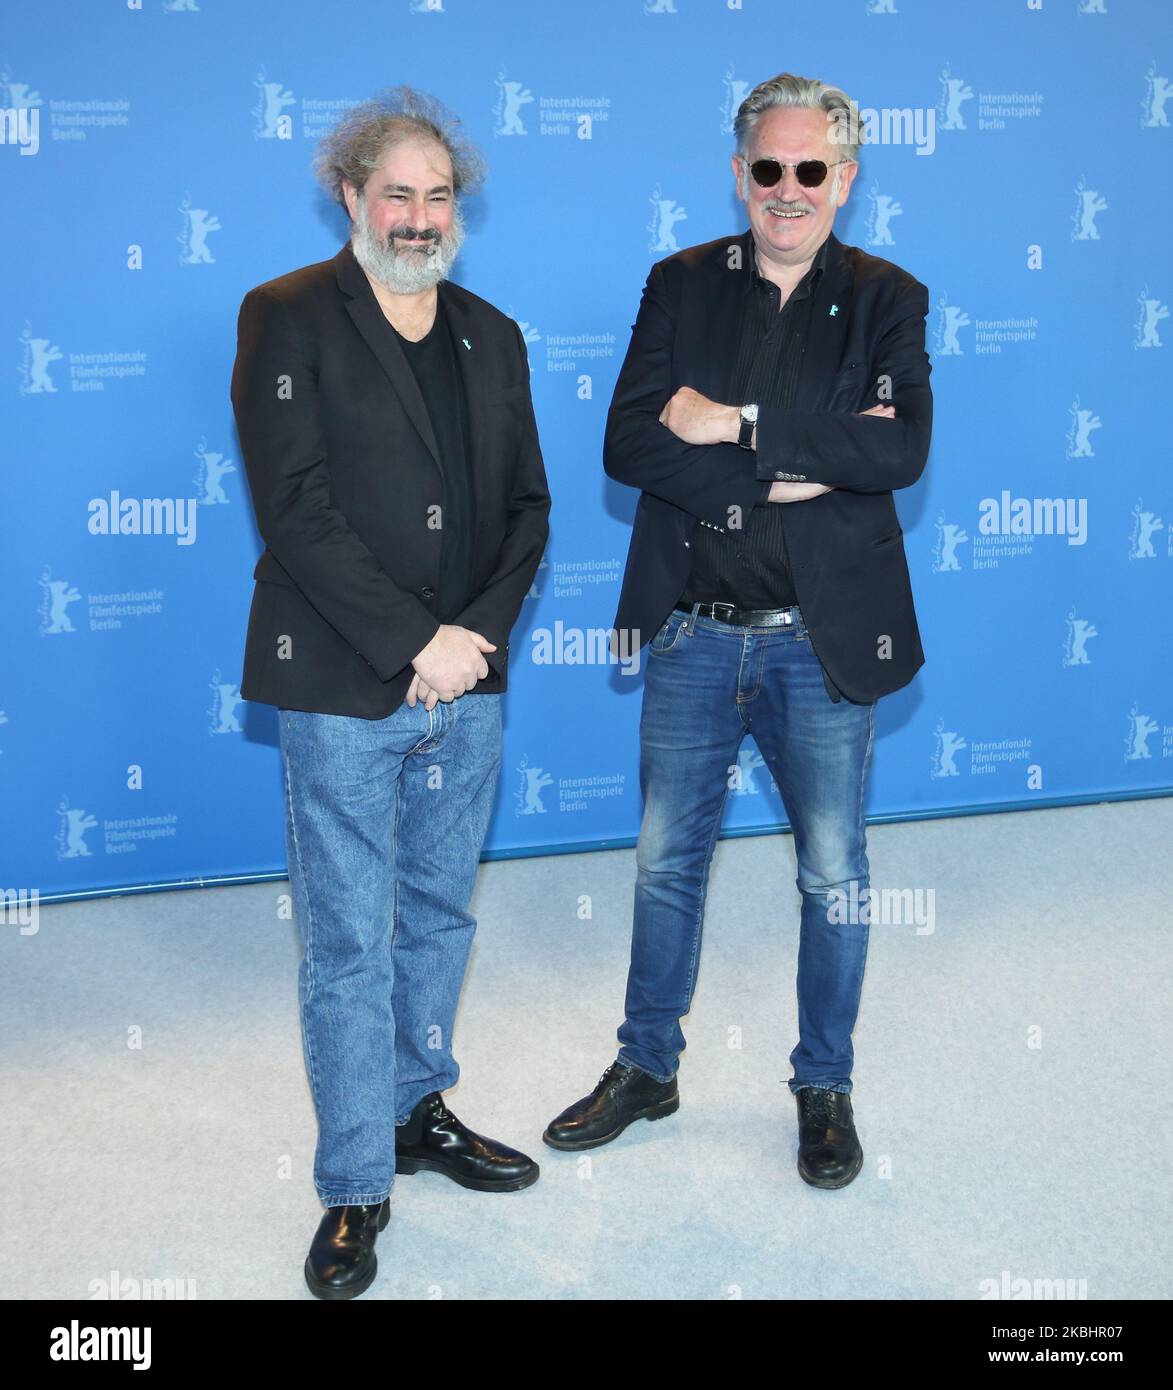 French directors Gustave Kervern and Benoit Delepine pose at the ''Delete History' (Effacer L'historique) photo call during 70th Berlinale International Film Festival in Grand Hyatt in Berlin, Germany on February 24, 2020. (Photo by Dominika Zarzycka/NurPhoto) Stock Photo